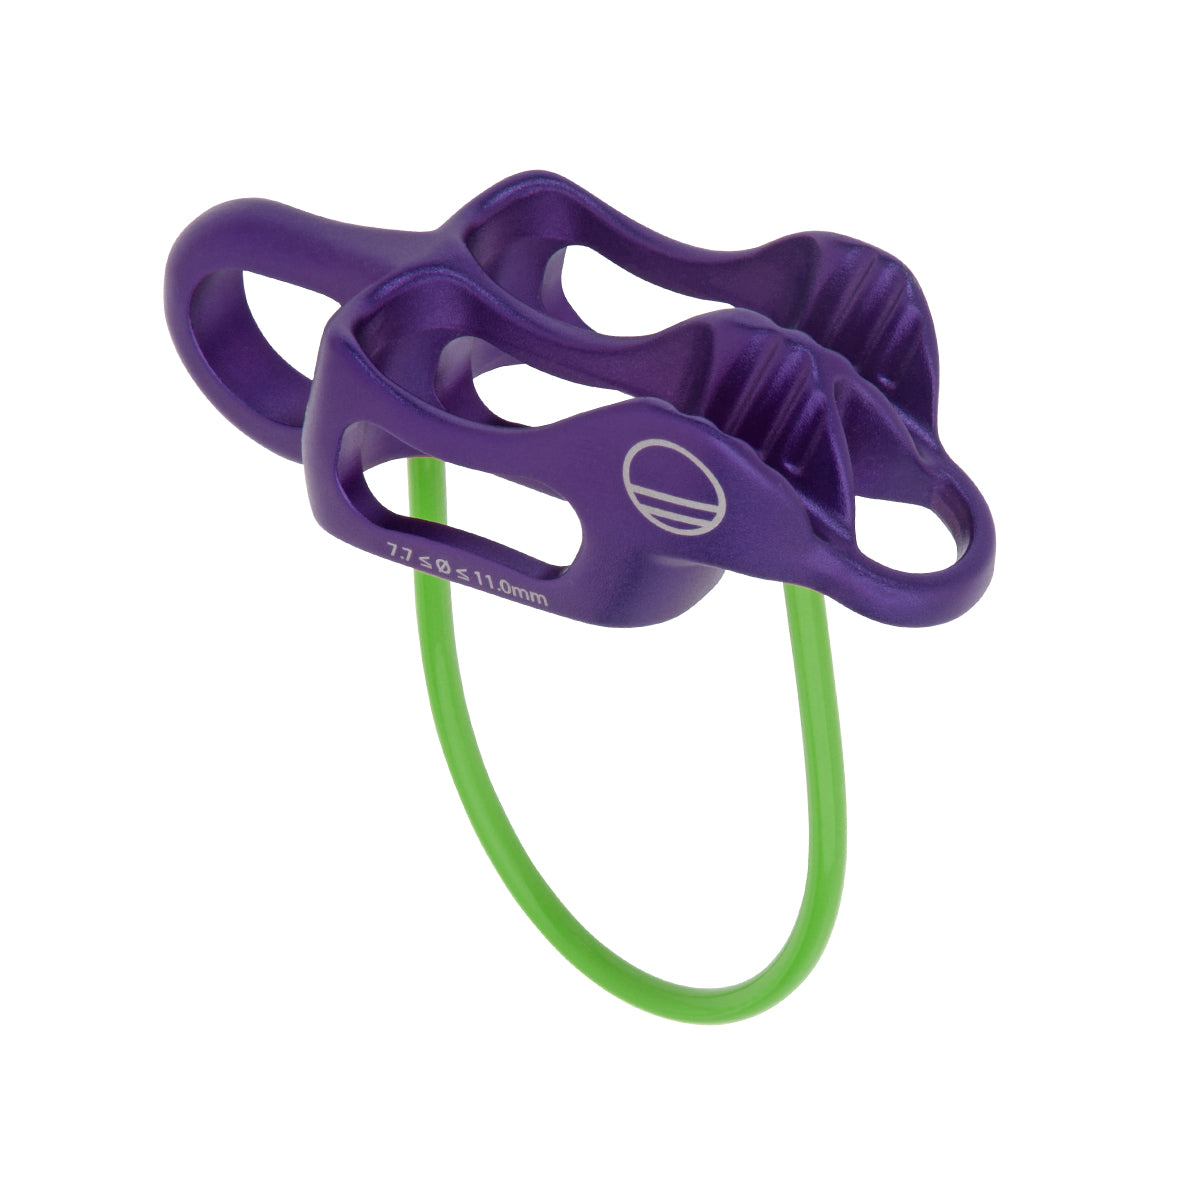 Wild Country Pro Guide Lite Belay Device - Purple/Green